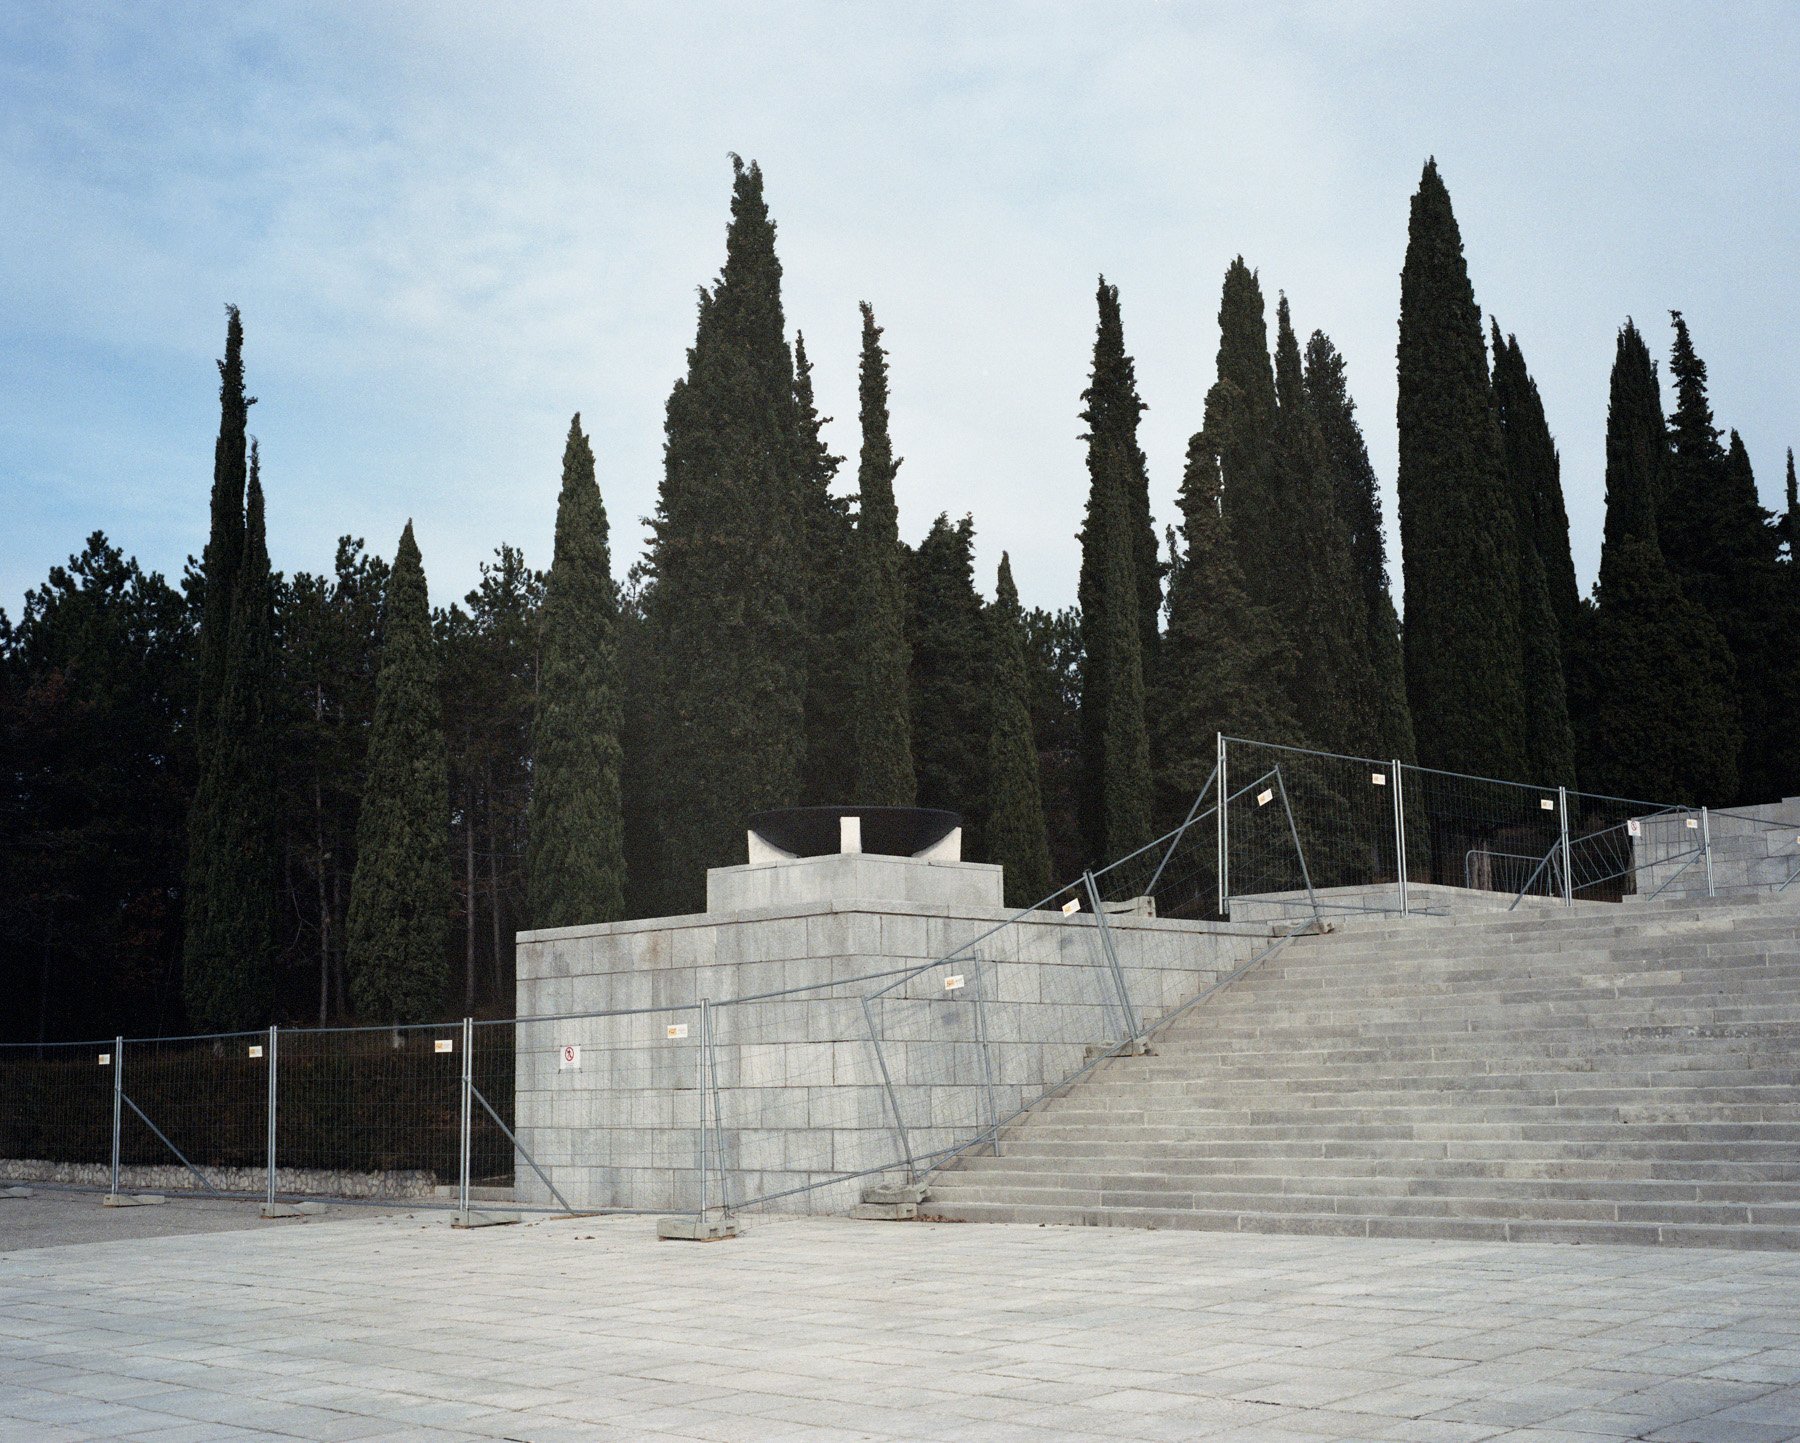  Italy, Redipuglia. 2019. A view of Redipuglia War Memorial, the largest war memorial in the World housing the remains of 100000 Italian soldiers died during the first World War. 